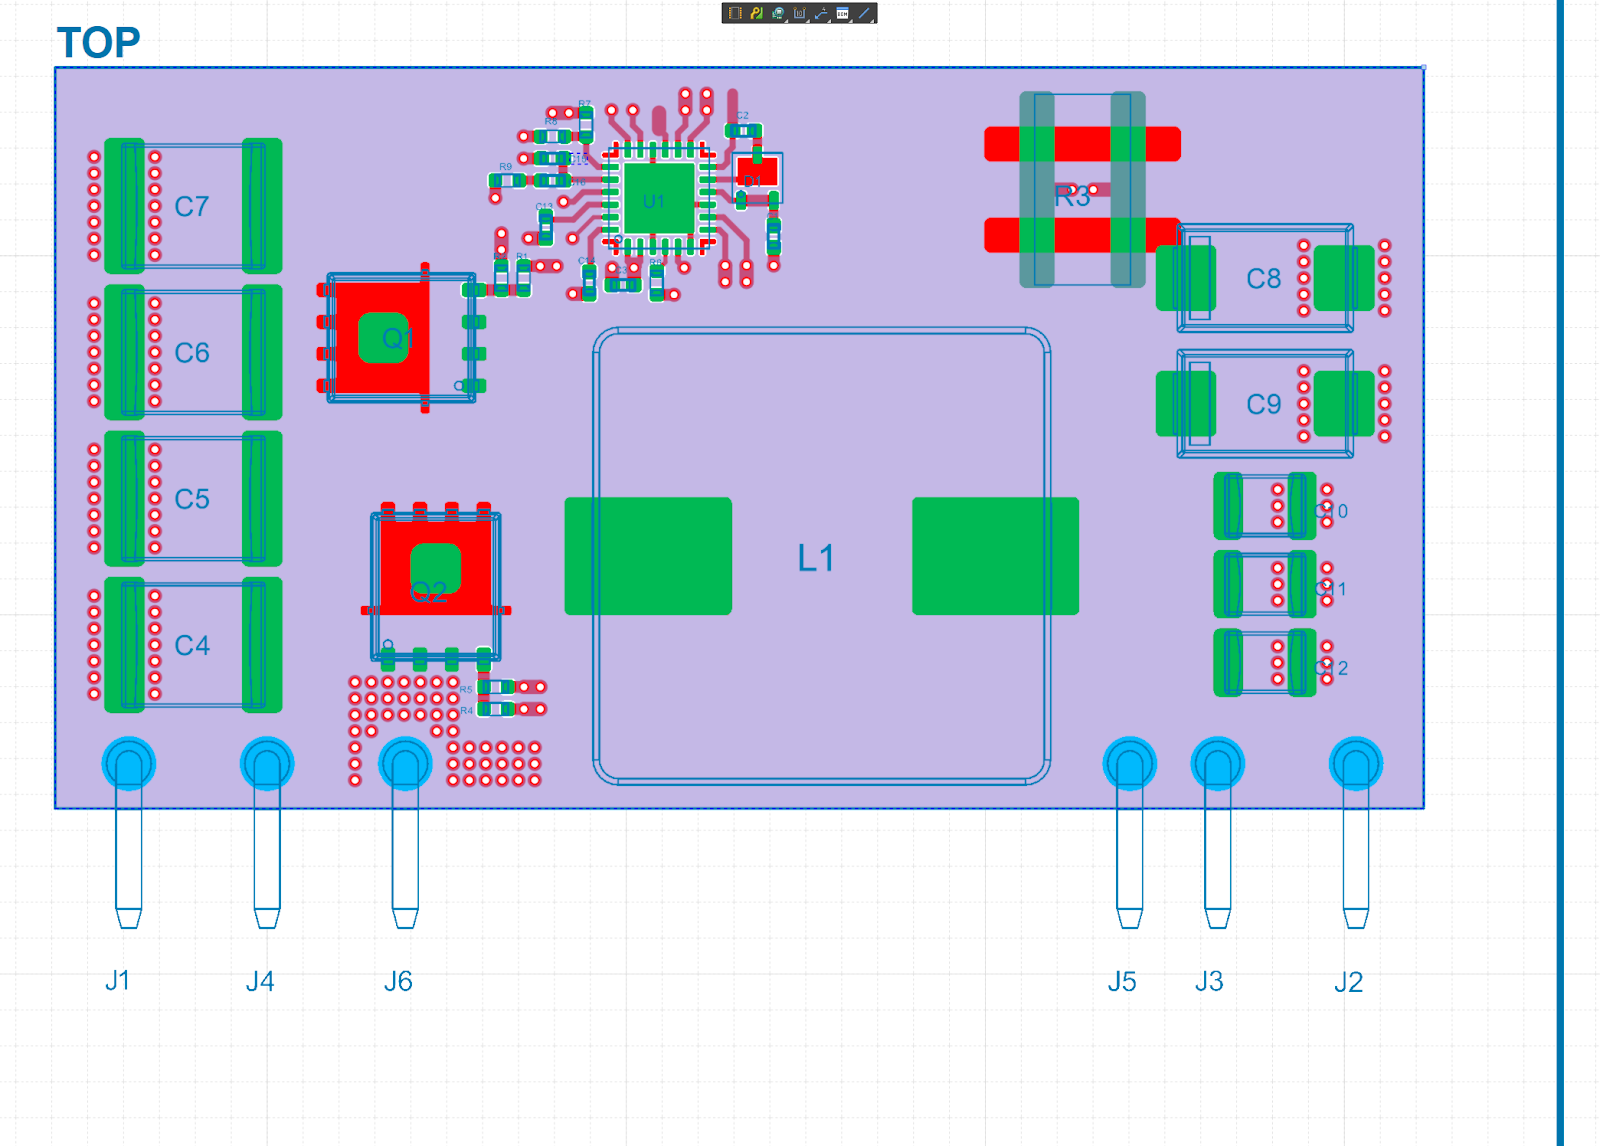 Board Assembly View Showing Mask, Topology, Through-holes, and Pads